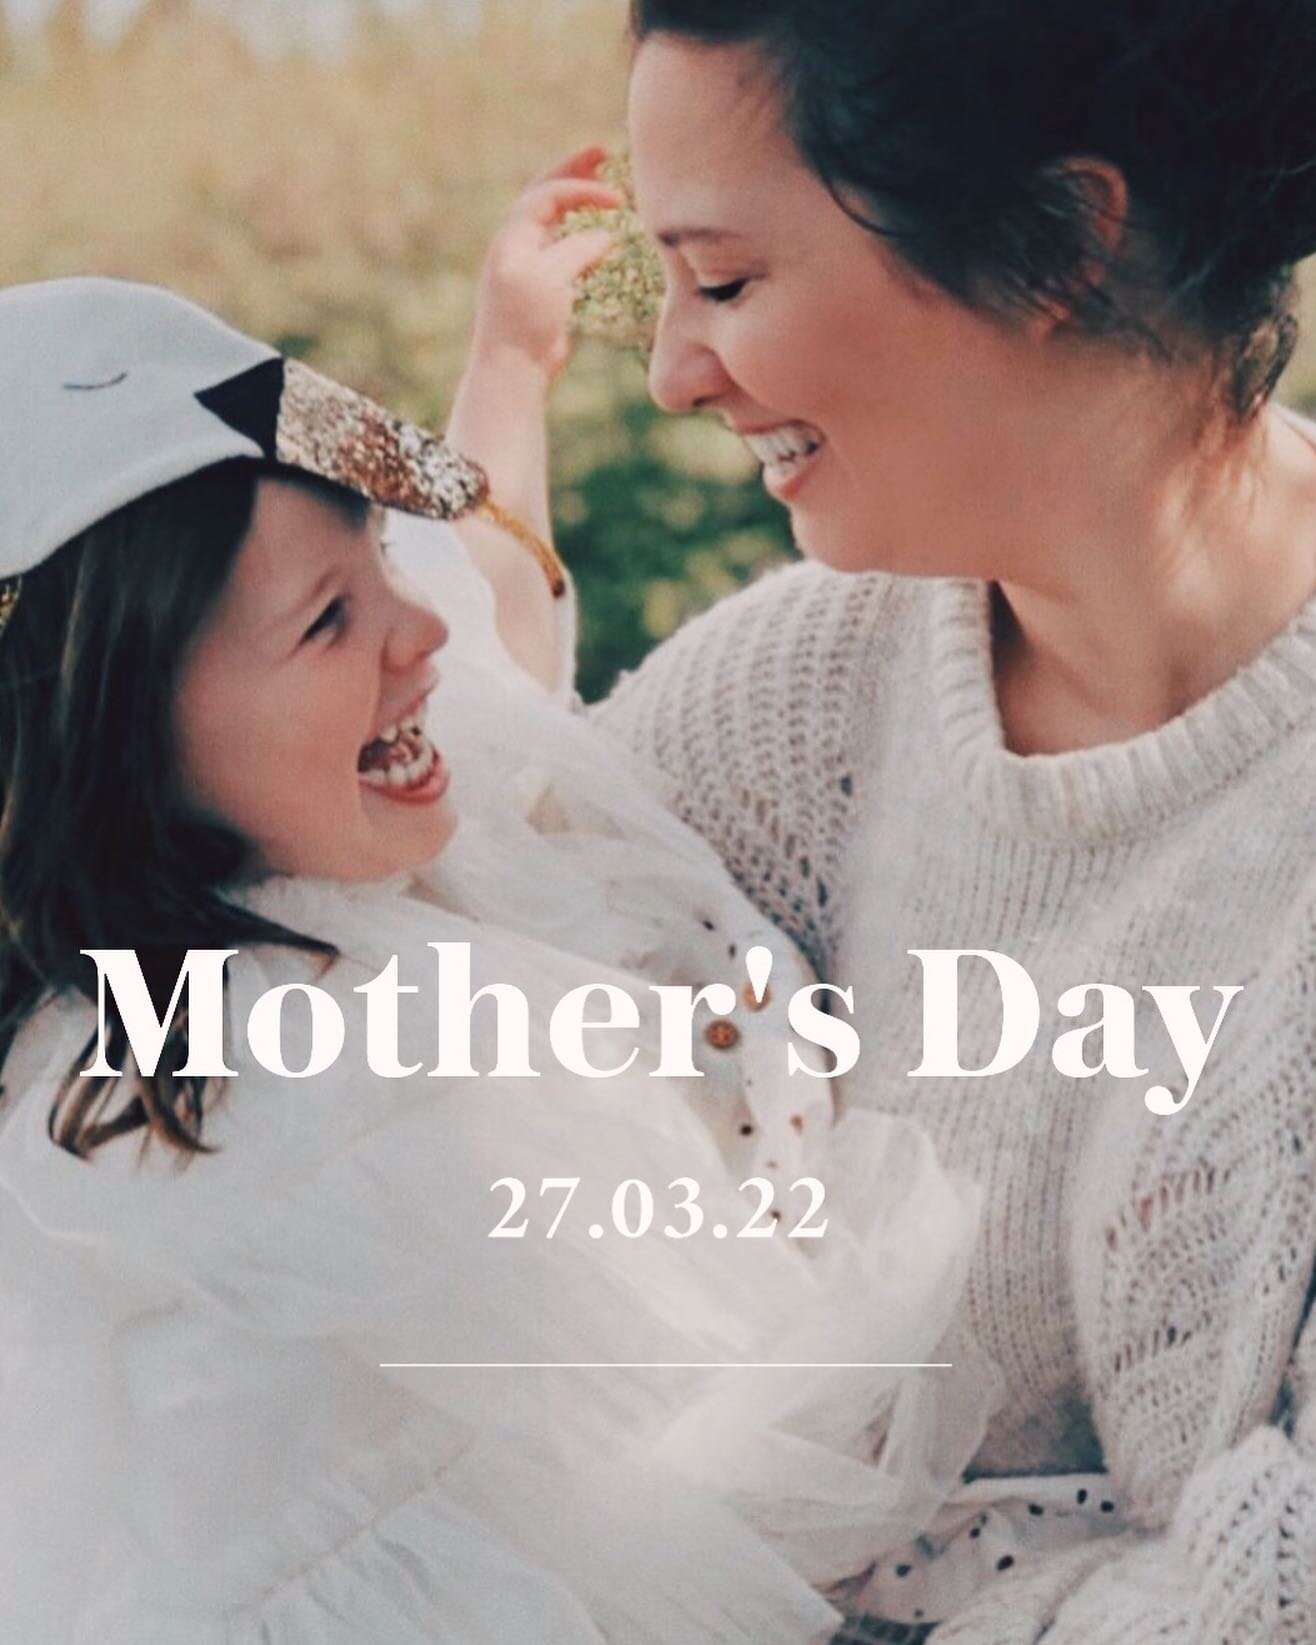 Mums the word! Mother day is just around the corner and this season in particular I want to shed more light on the little MOMENTS in your journey that are bringing you joy&hellip; in the parts and pieces of your story that are BLOOMING 🌼🌿. Cause la